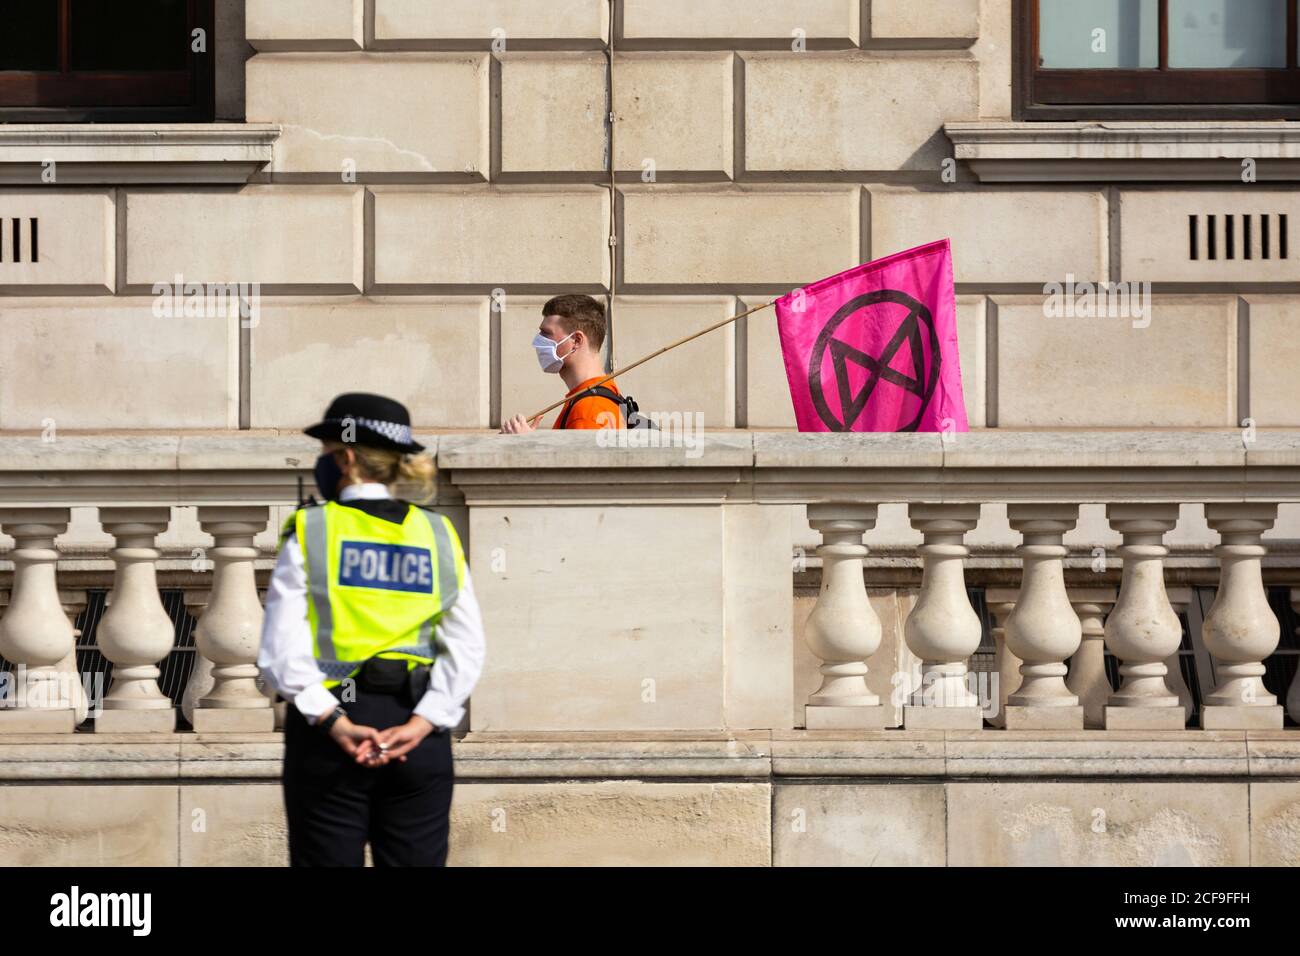 A protester with flag walks past a police officer at an Extinction Rebellion demonstration, Parliament Square, London, 2 September 2020 Stock Photo